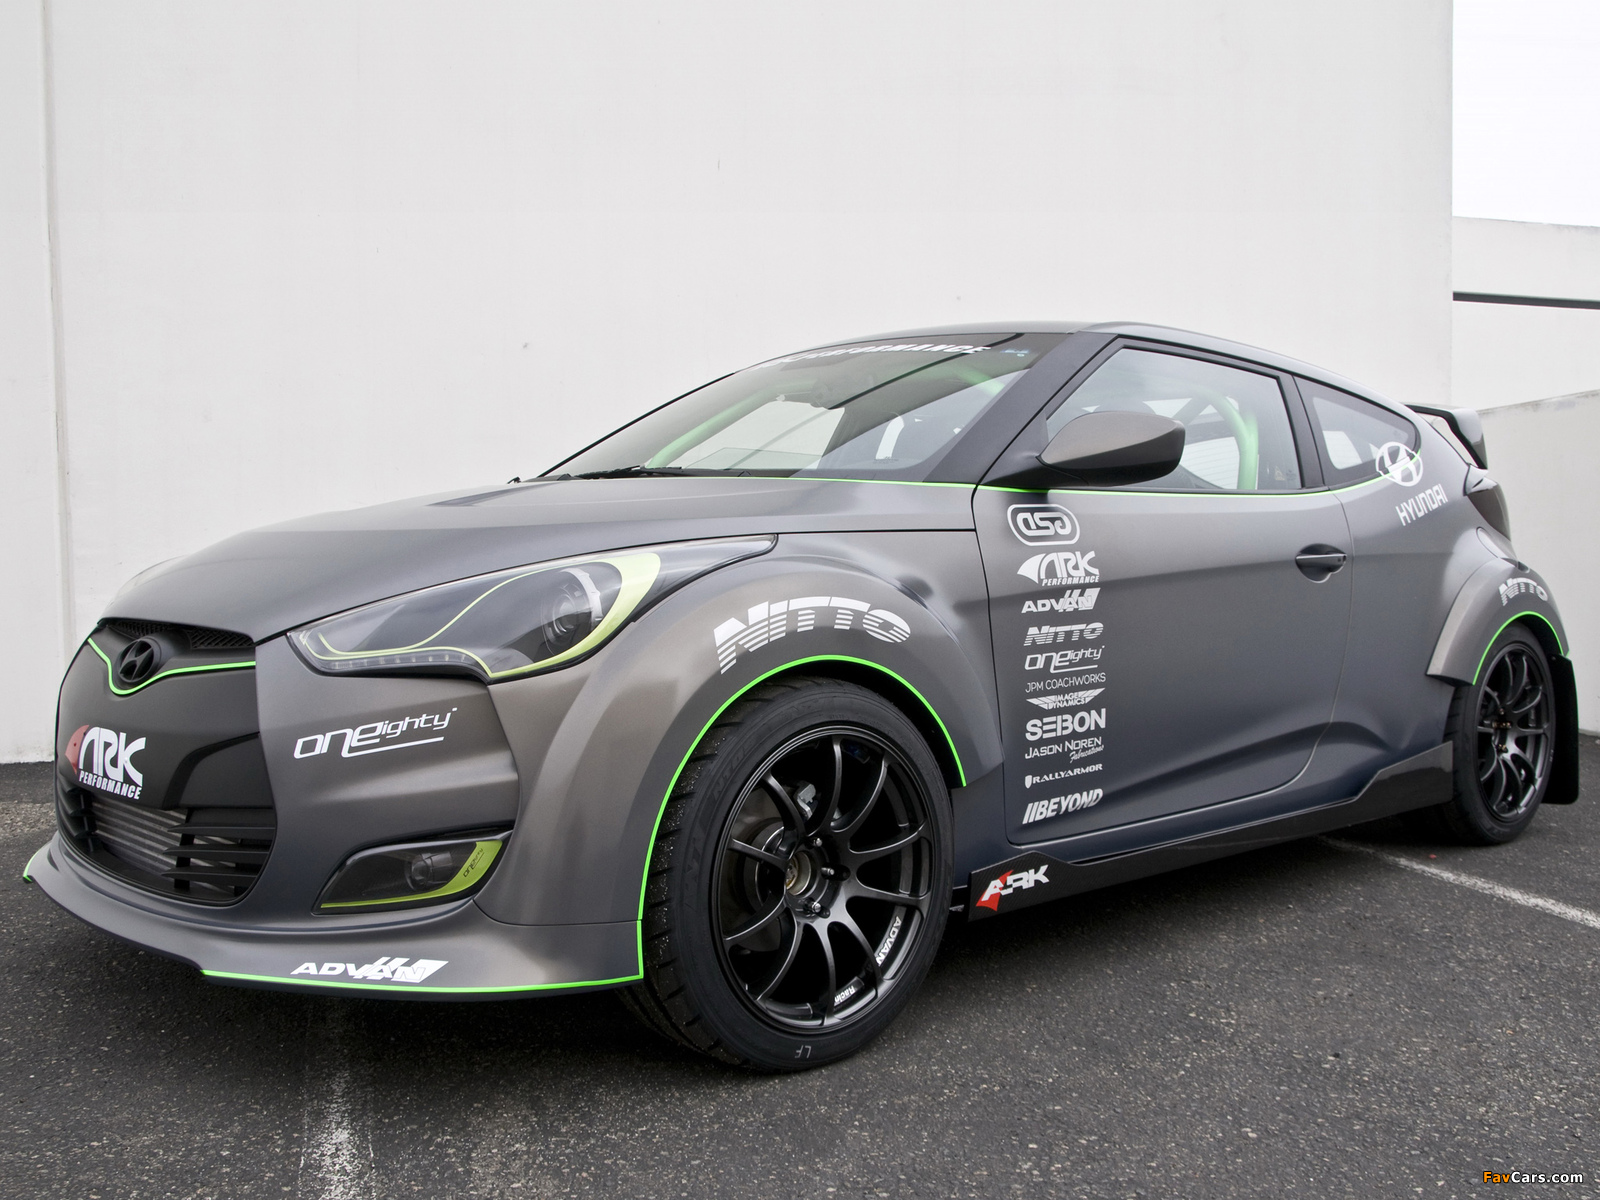 ARK Performance Hyundai Veloster 2011 pictures (1600 x 1200)